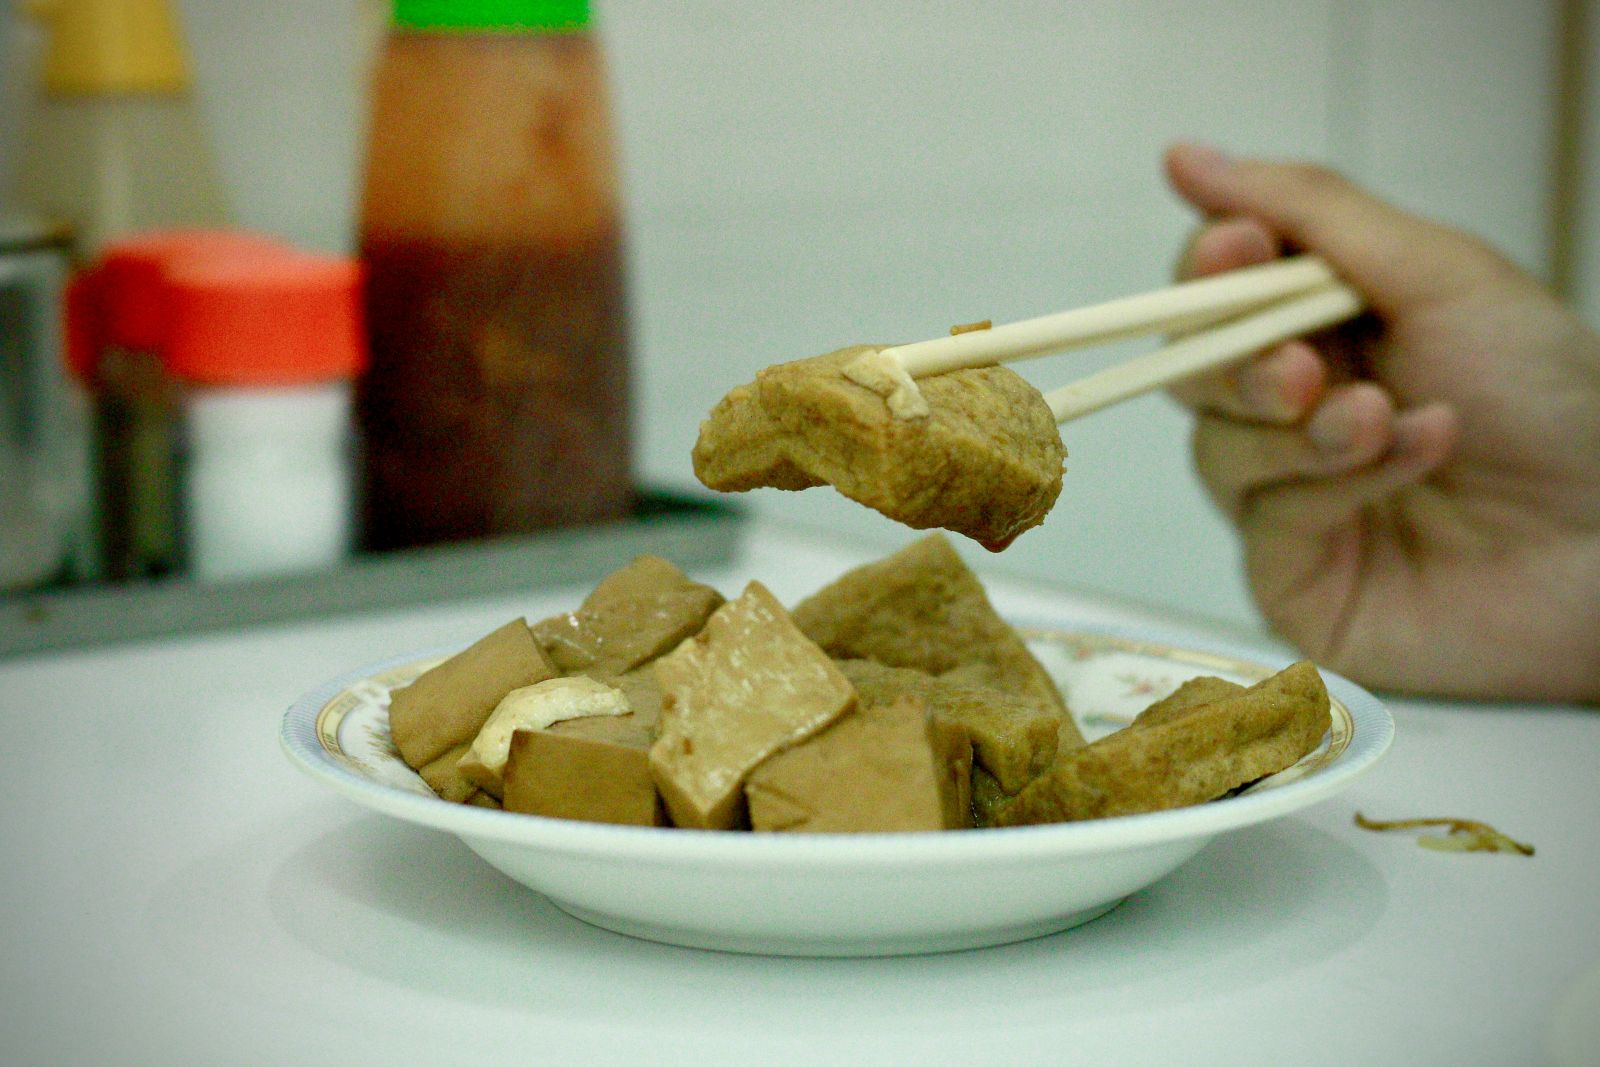 Tofu and bean curd puff with soy sauce (鹵水豆腐卜）